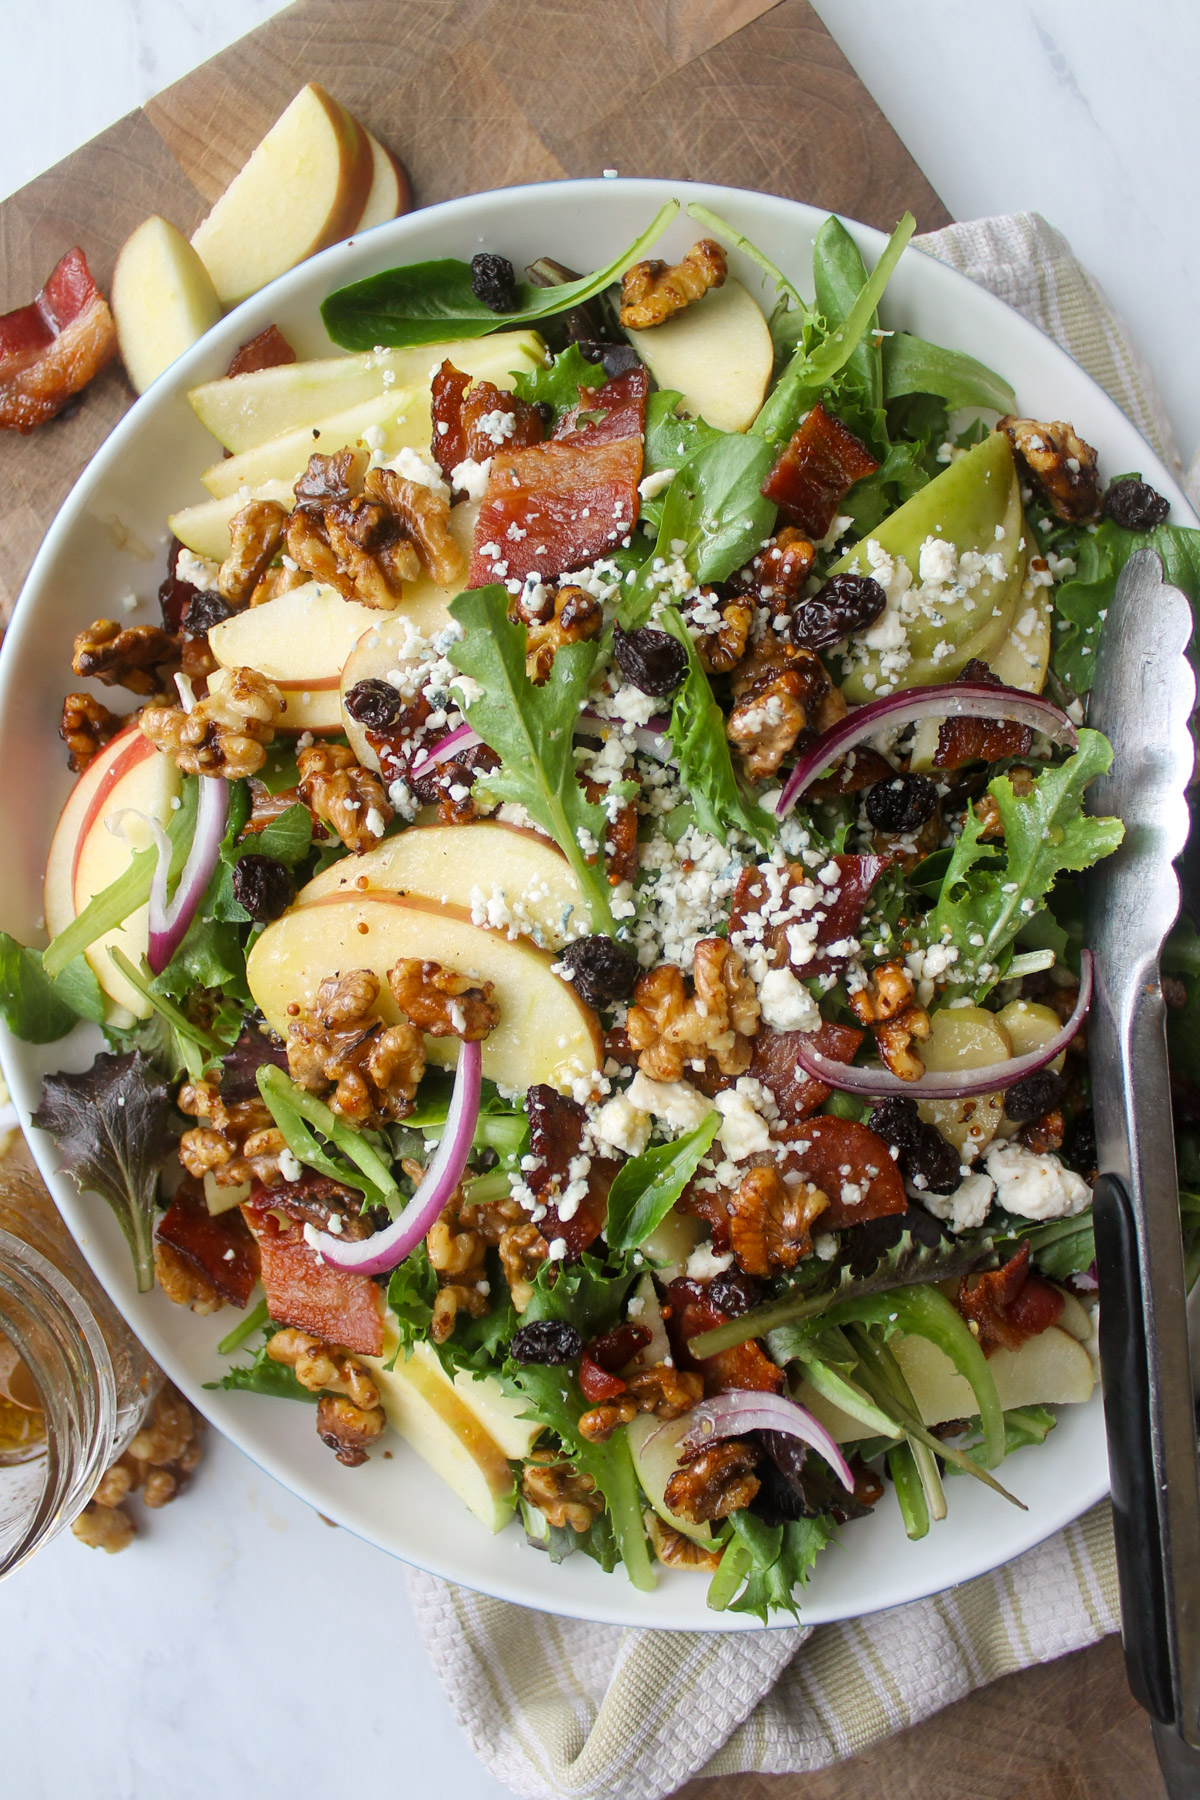 A plate of salad with apple slices, walnuts, blue cheese, raisins and red onion.